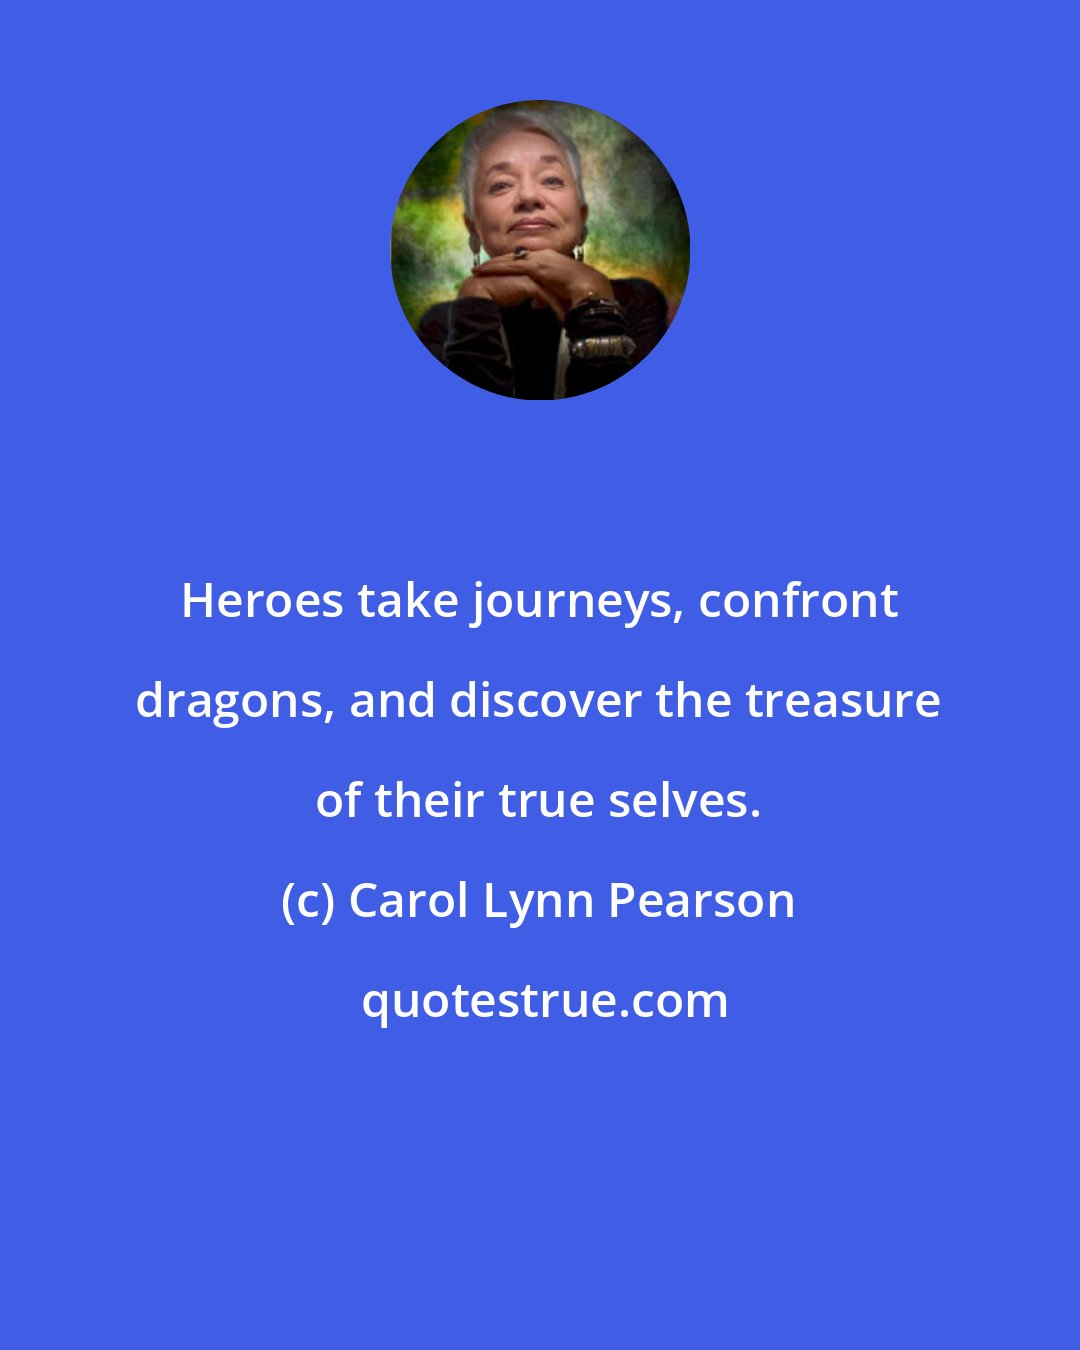 Carol Lynn Pearson: Heroes take journeys, confront dragons, and discover the treasure of their true selves.